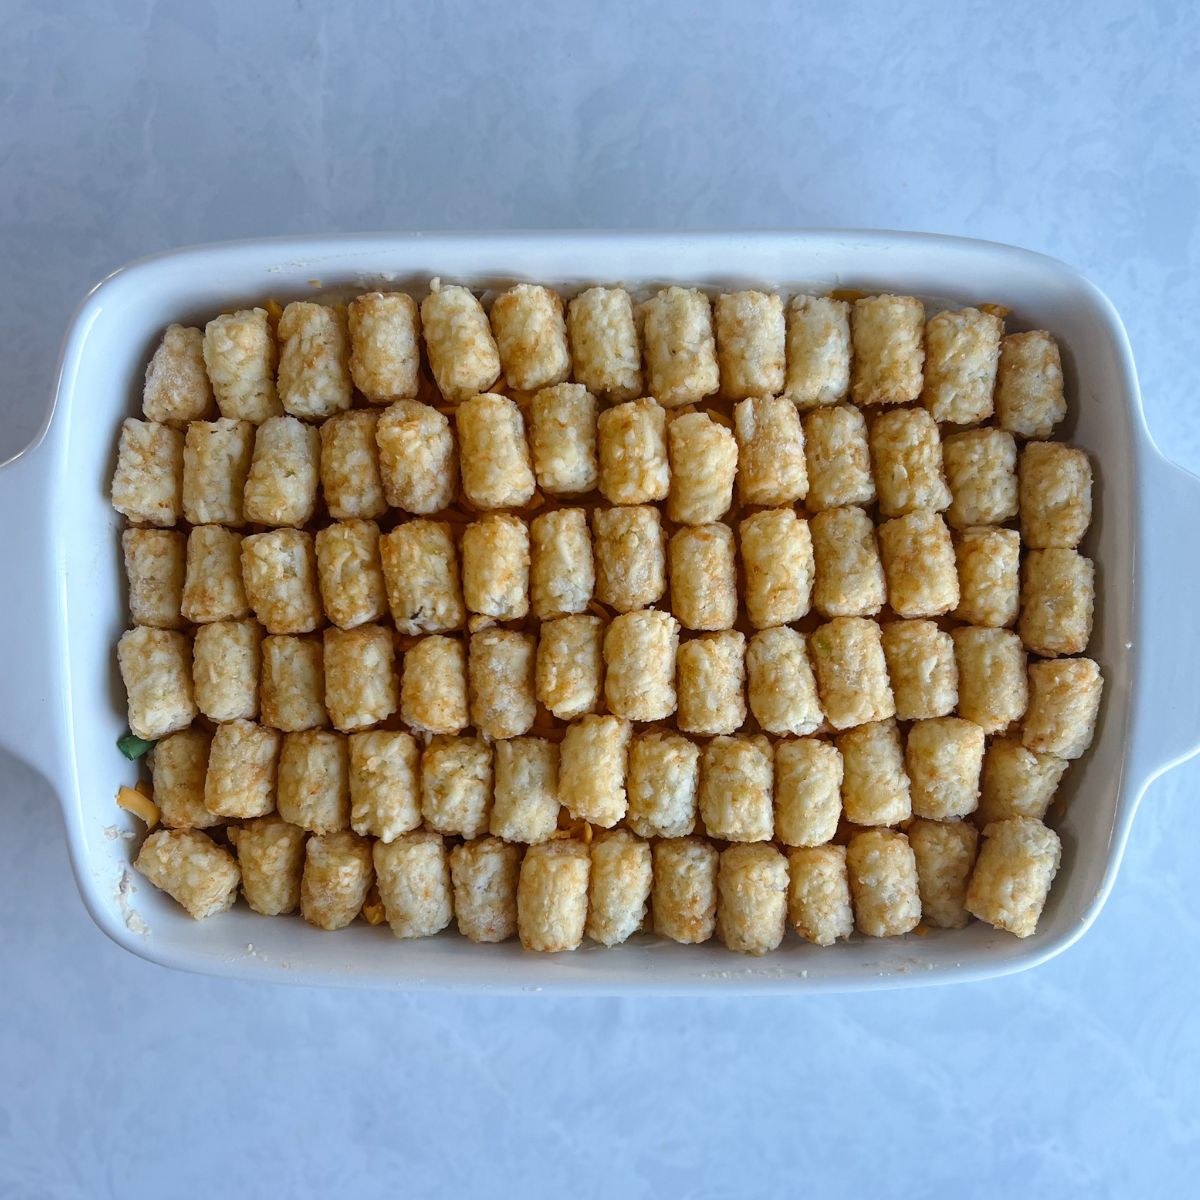 Uncooked tater tot hotdish with the tater tots lined evenly on top of the ingredients.